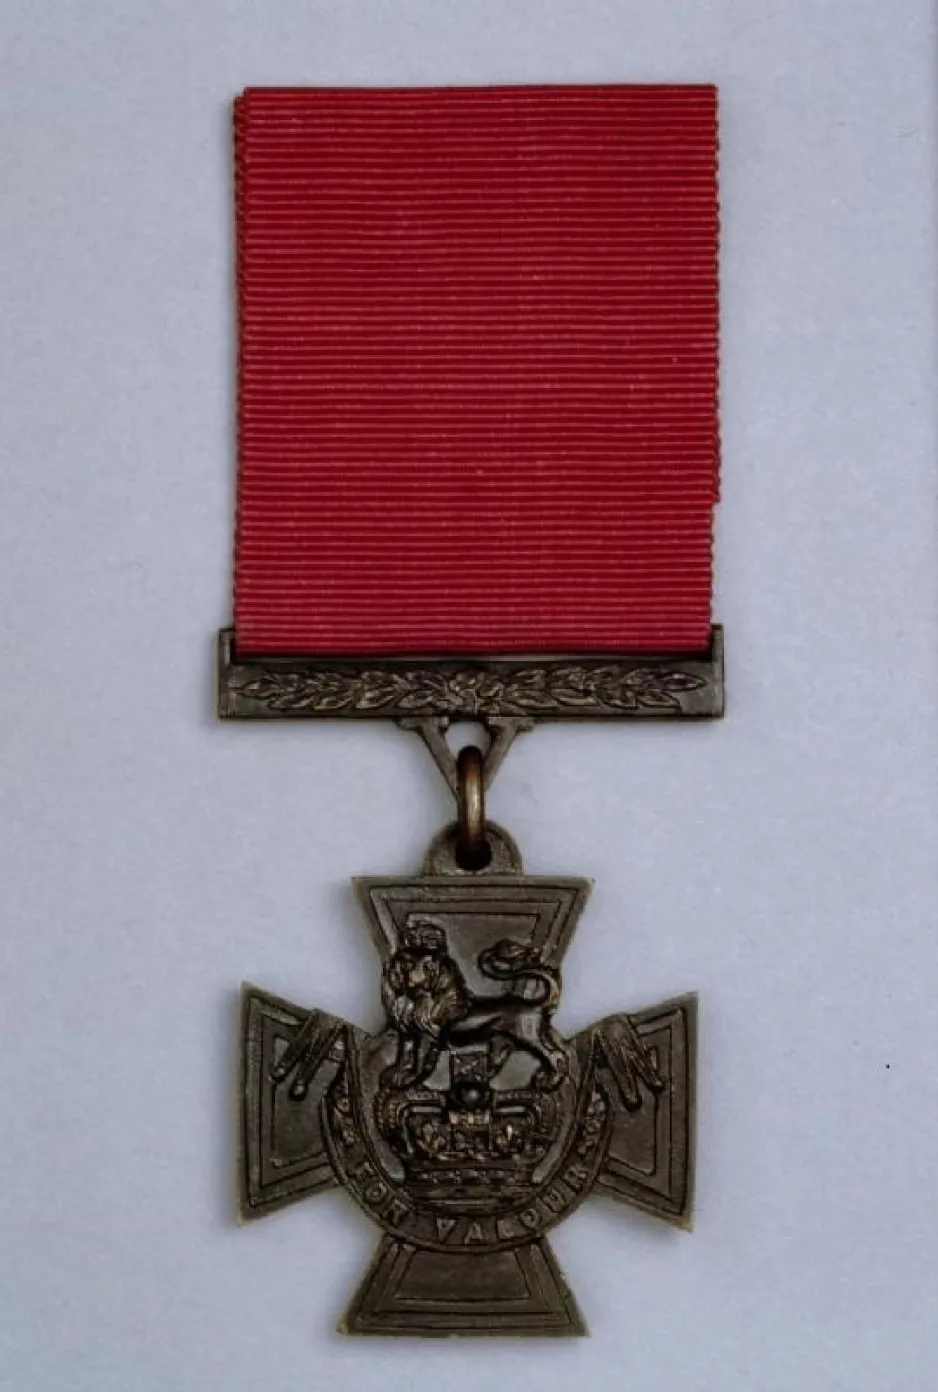 A Victoria Cross medal — a bronze cross with a lion atop a crown, with the inscription “For Valour” across the bottom. 